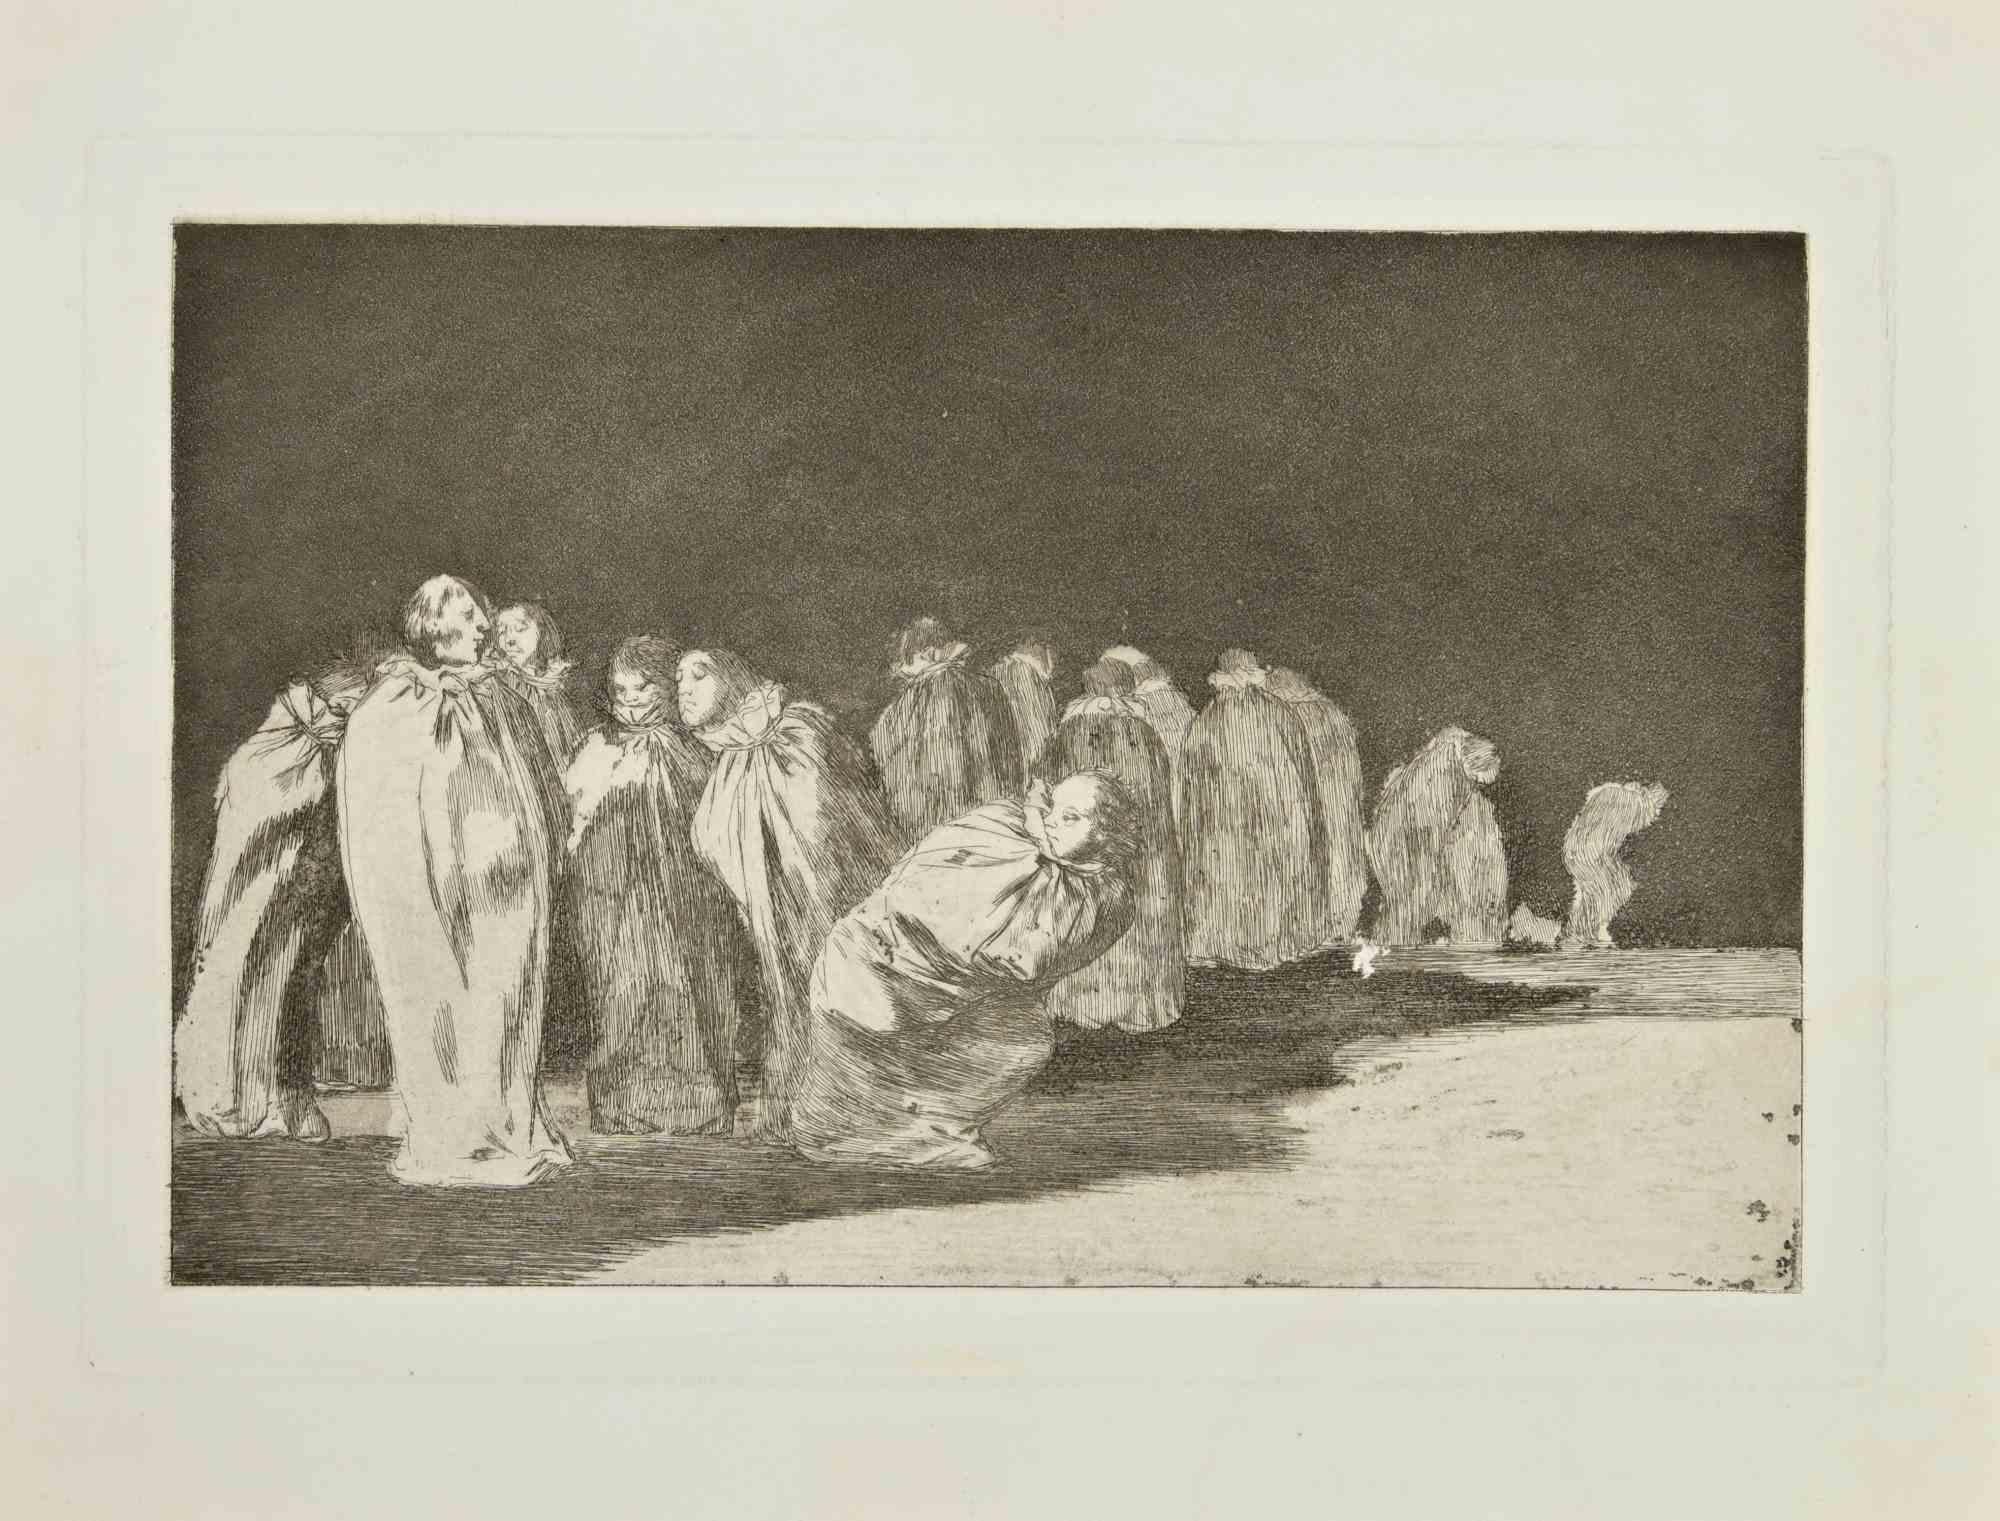 So El Sayal, Hay Al, 1904 is an artwork realized by Francisco Josè de Goya y Lucientes.

Etching and burnished aquatint.

Plate 24.3x35.3 cm

Sheet cm 31,5x40,5.

Printer: Chalcography for the Real Academia, 1904, nineth plate from Los proverbios,